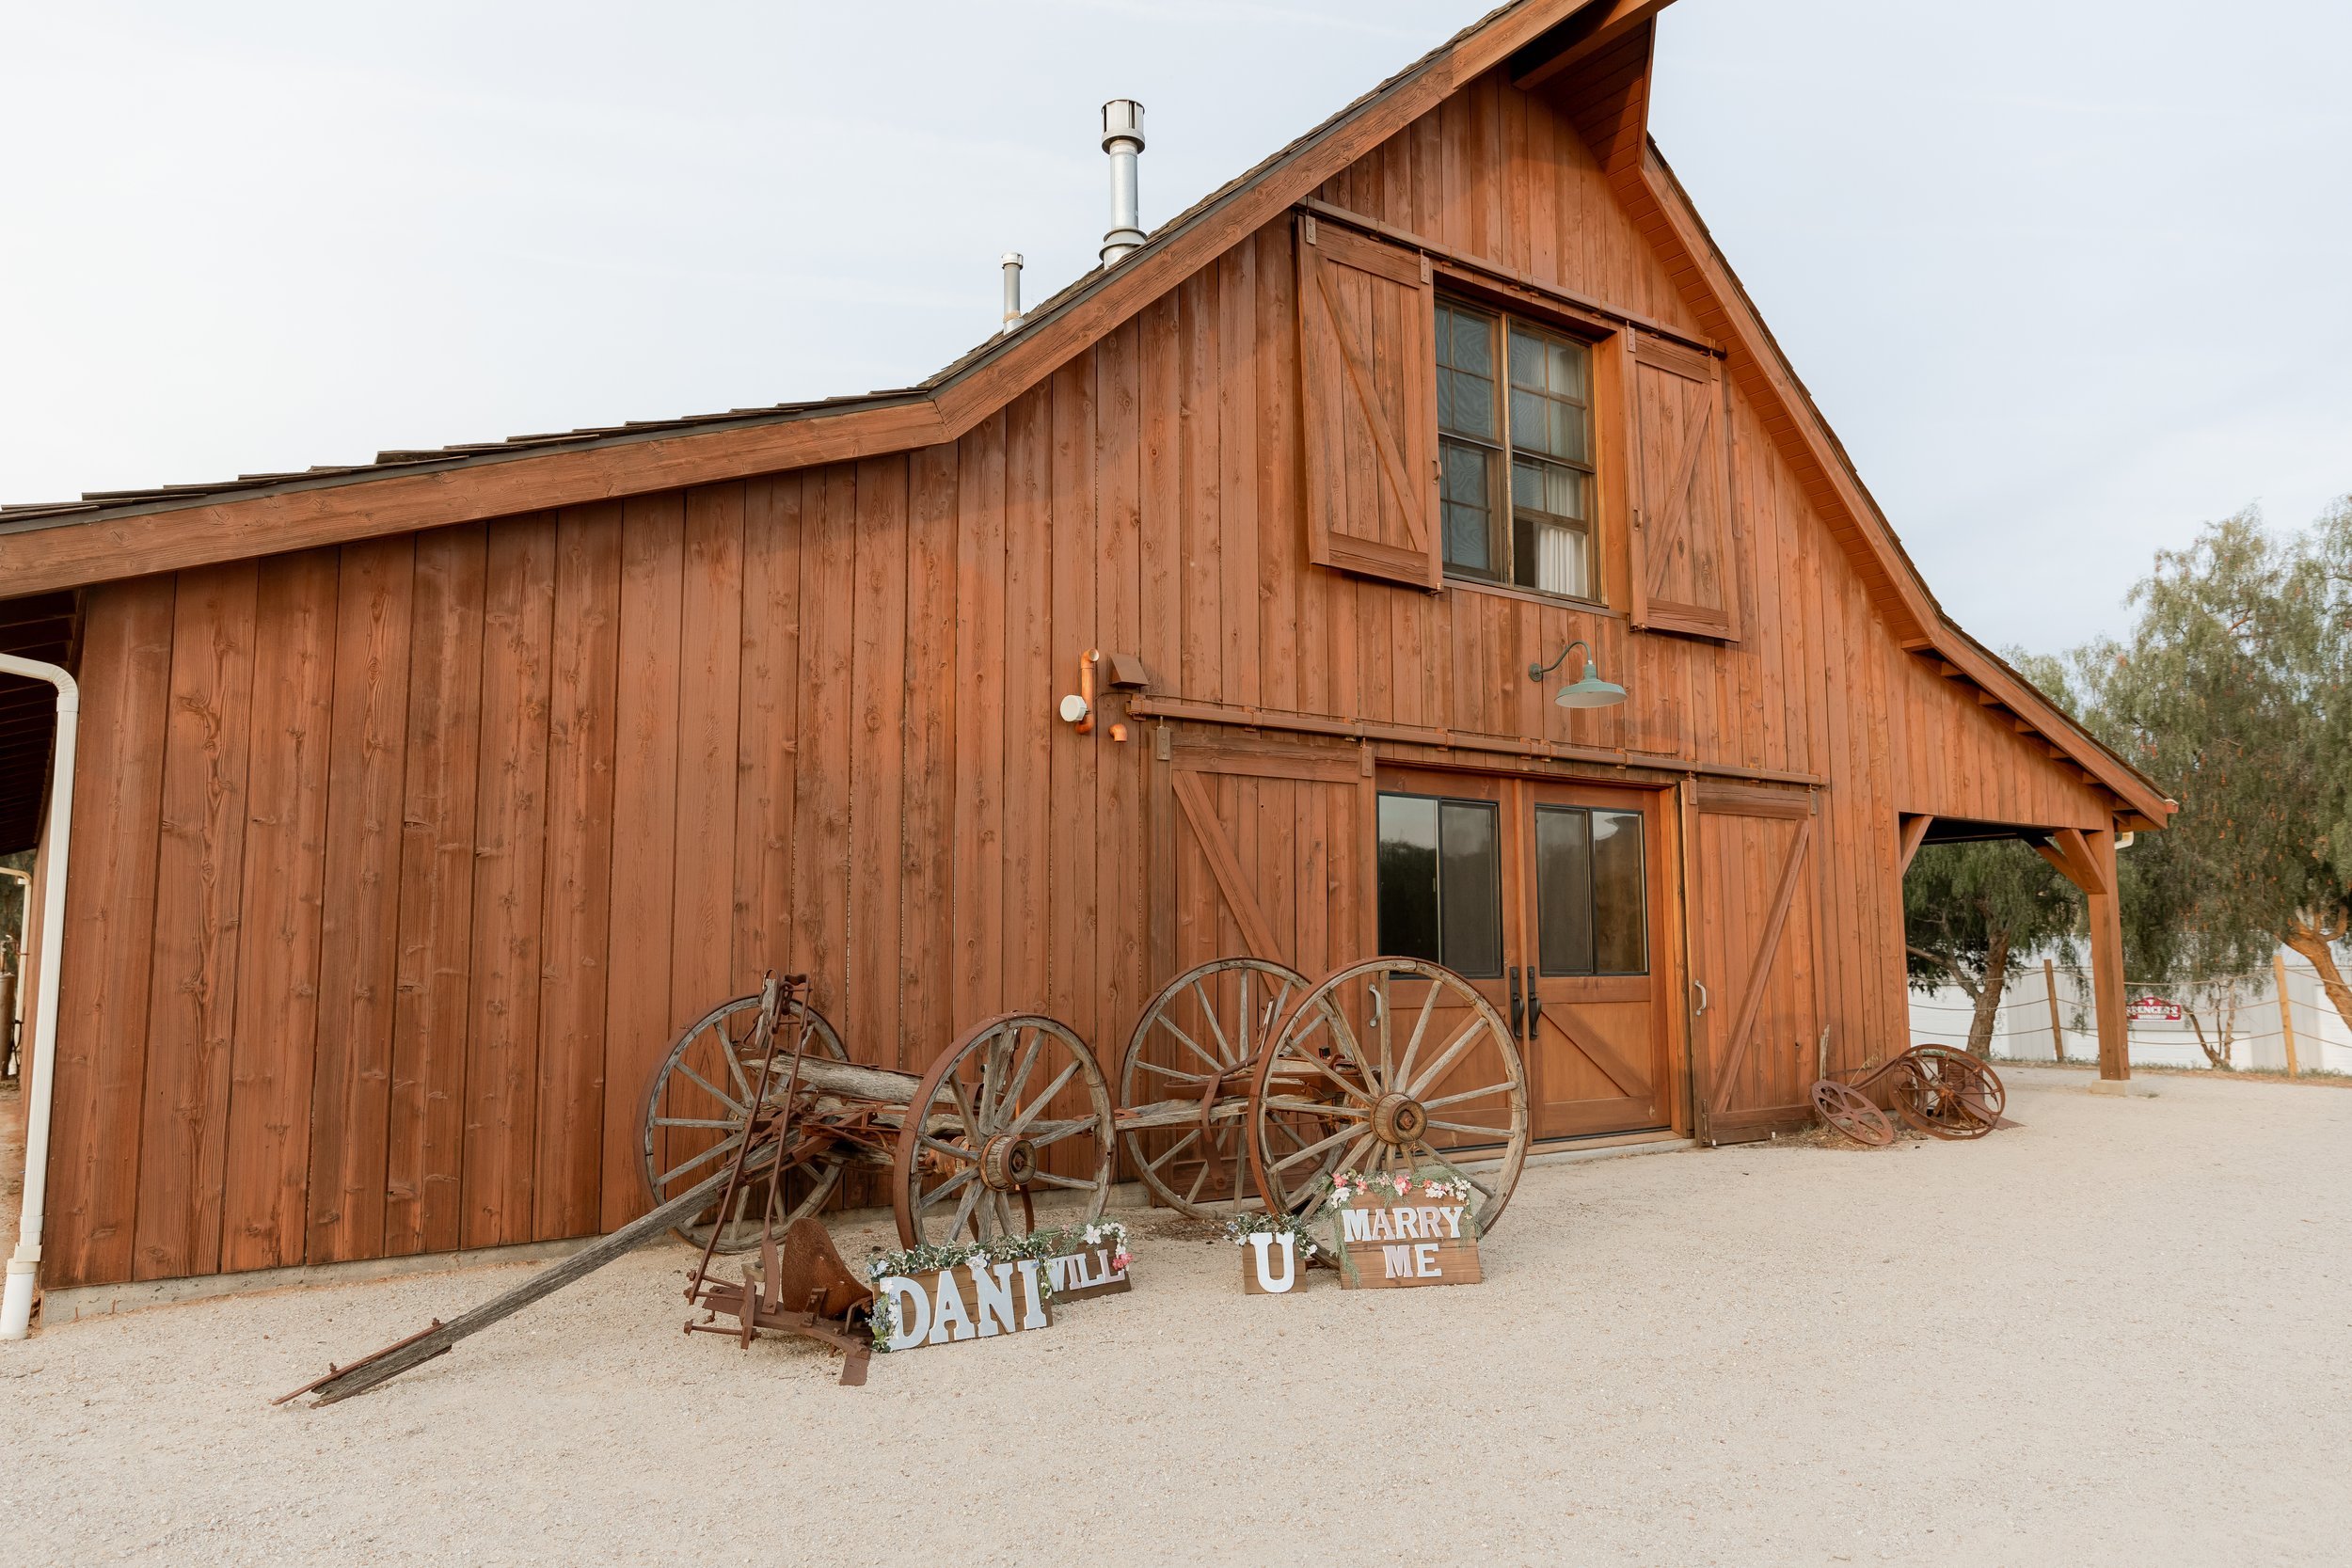 www.santabarbarawedding.com | MacKenzie Rana Photography | Fish House San Luis Obispo | Barn at Engagement Shoot Venue and ‘Will You Marry Me Signs’